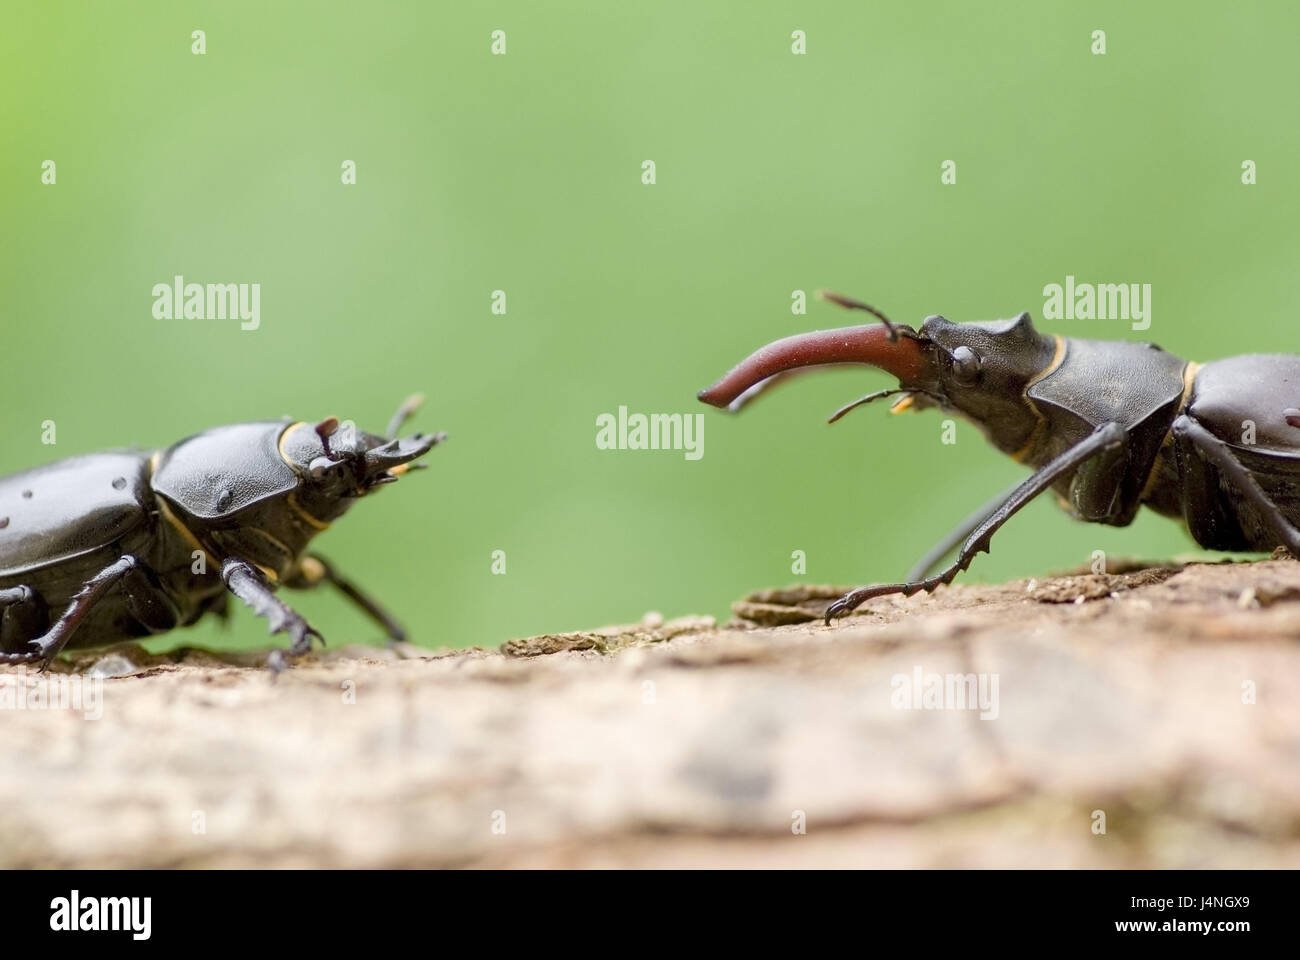 Stag beetles, Lucanus cervus, little men, females, encounter, preview, Switzerland, nature, animals, animal world, insects, beetles, two, couple, leaf horn beetle, tailor, fire tailor, imago, towards, antlers, Mandibeln, creep, creep, partner's search, mating season, seldom, endangers, threatens, nobody, bark, Stock Photo